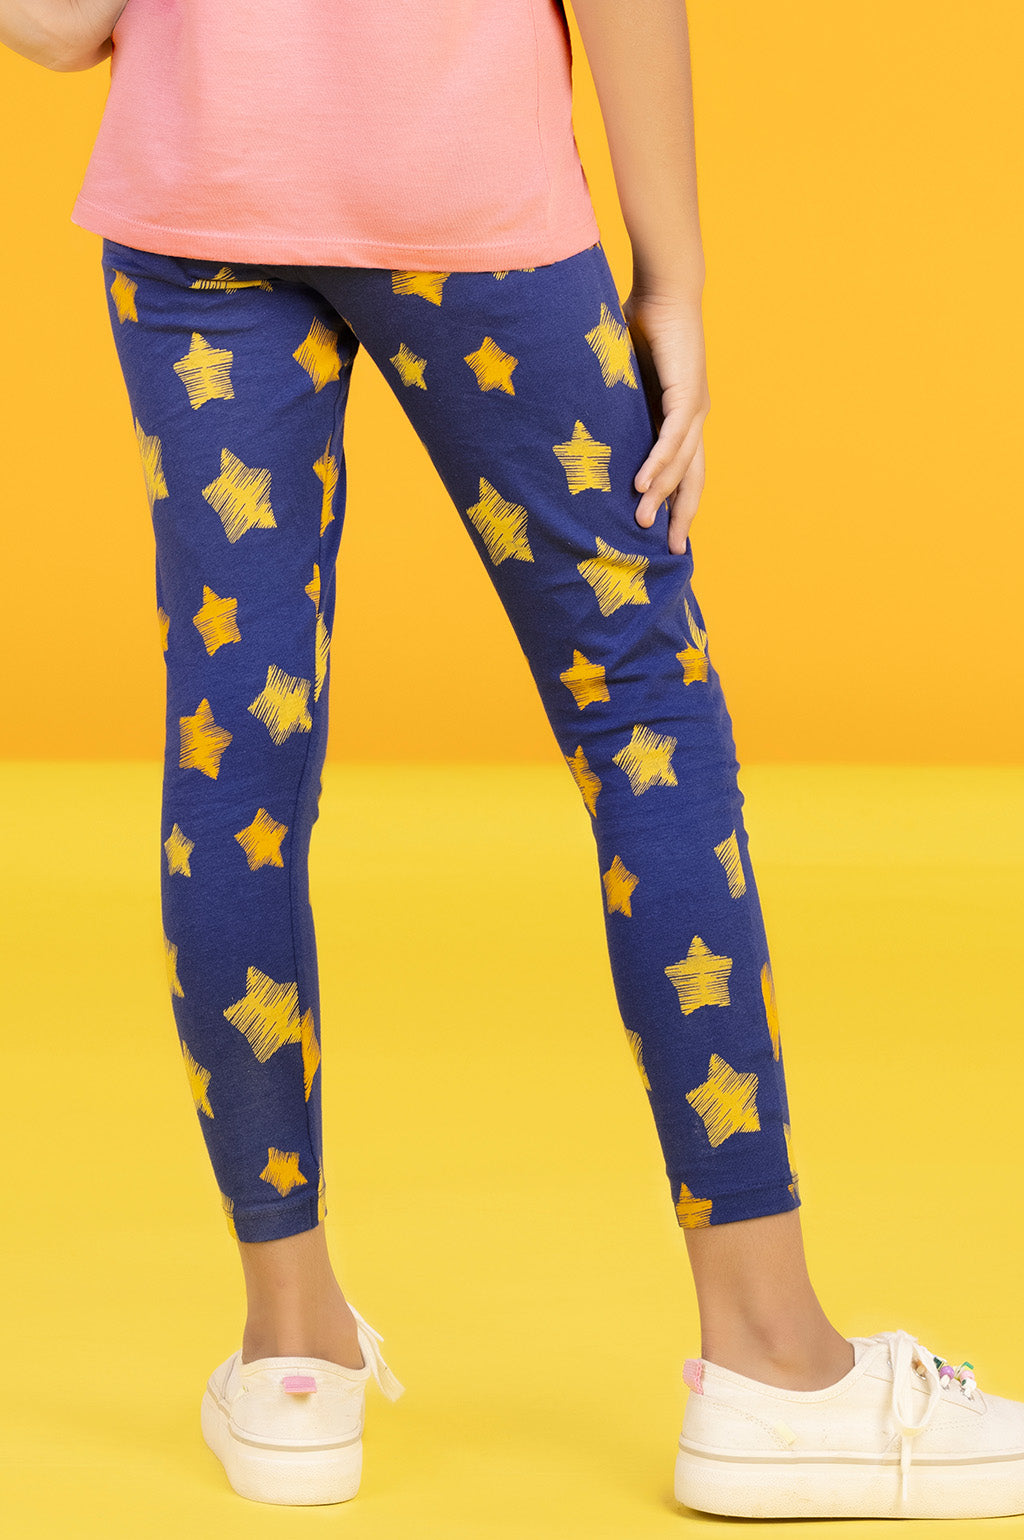 Girls leggings astro combed cotton blue - XYLife Kids Wear